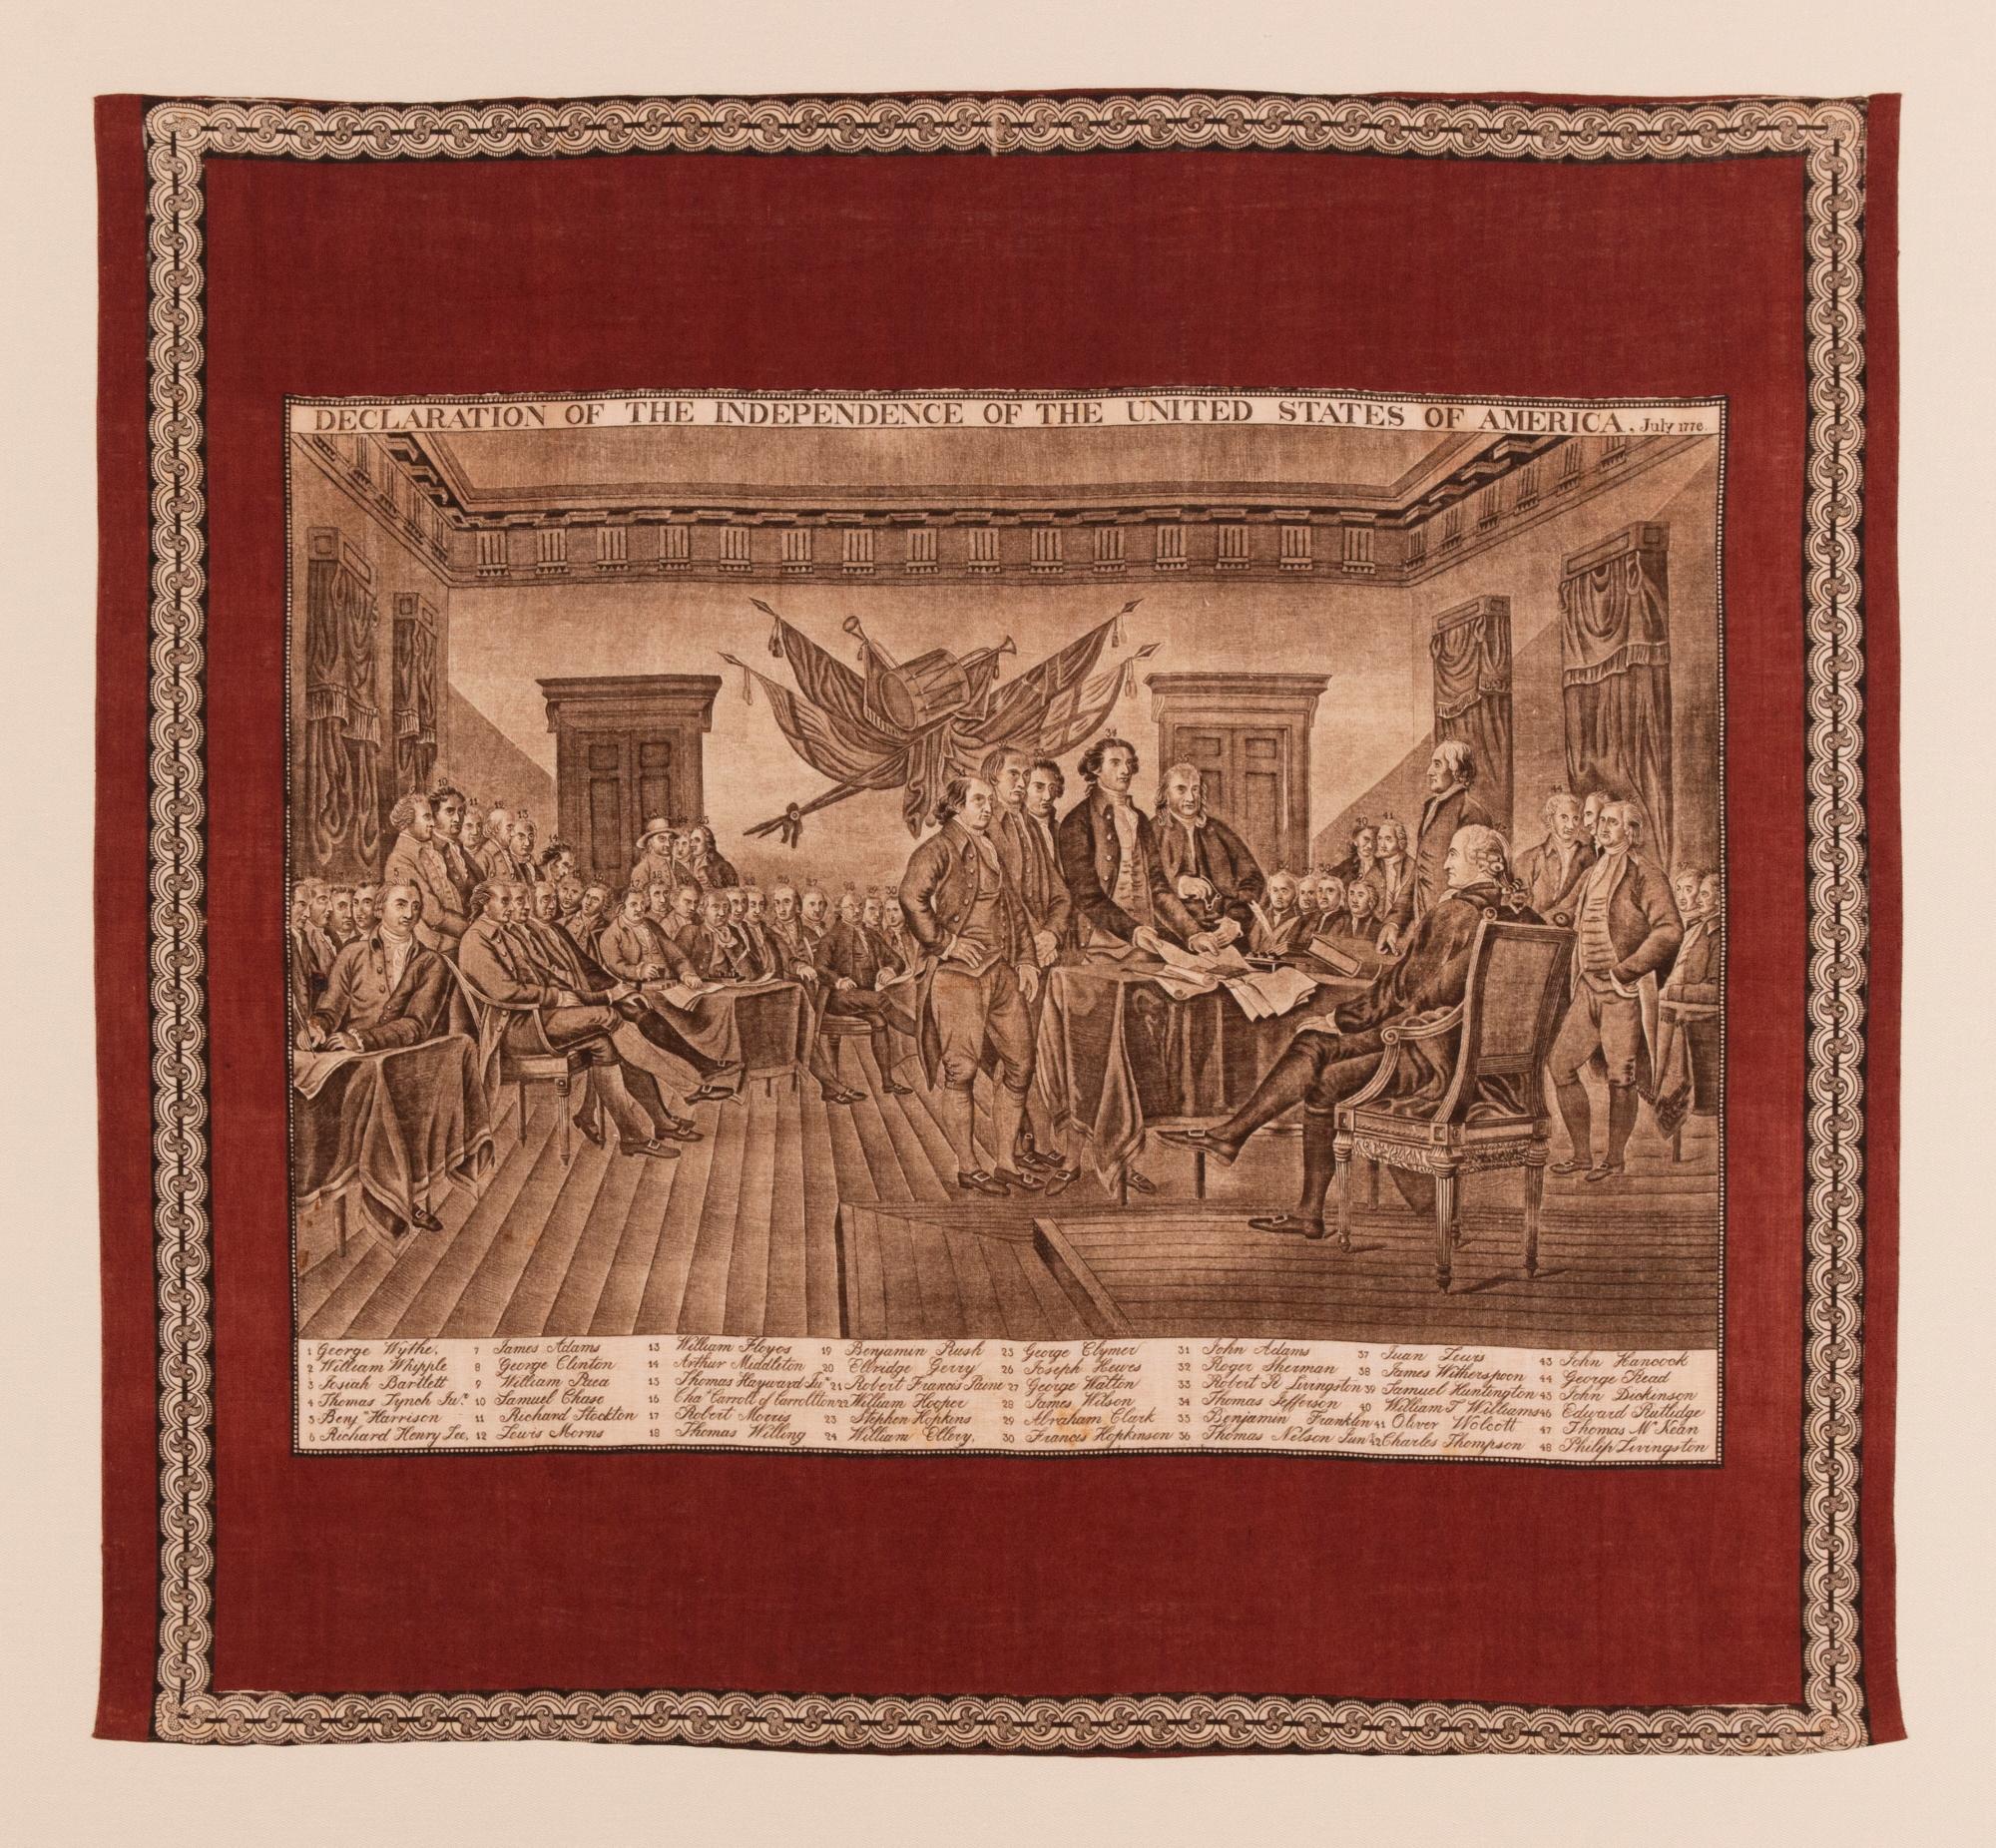 Rare, large scale Kerchief with a beautifully engraved image of John Trumbull’s “declaration of independence,” likely made in 1826 for our nations Semi centennial (50th anniversary); the only example I have ever seen of this exceptionally rare